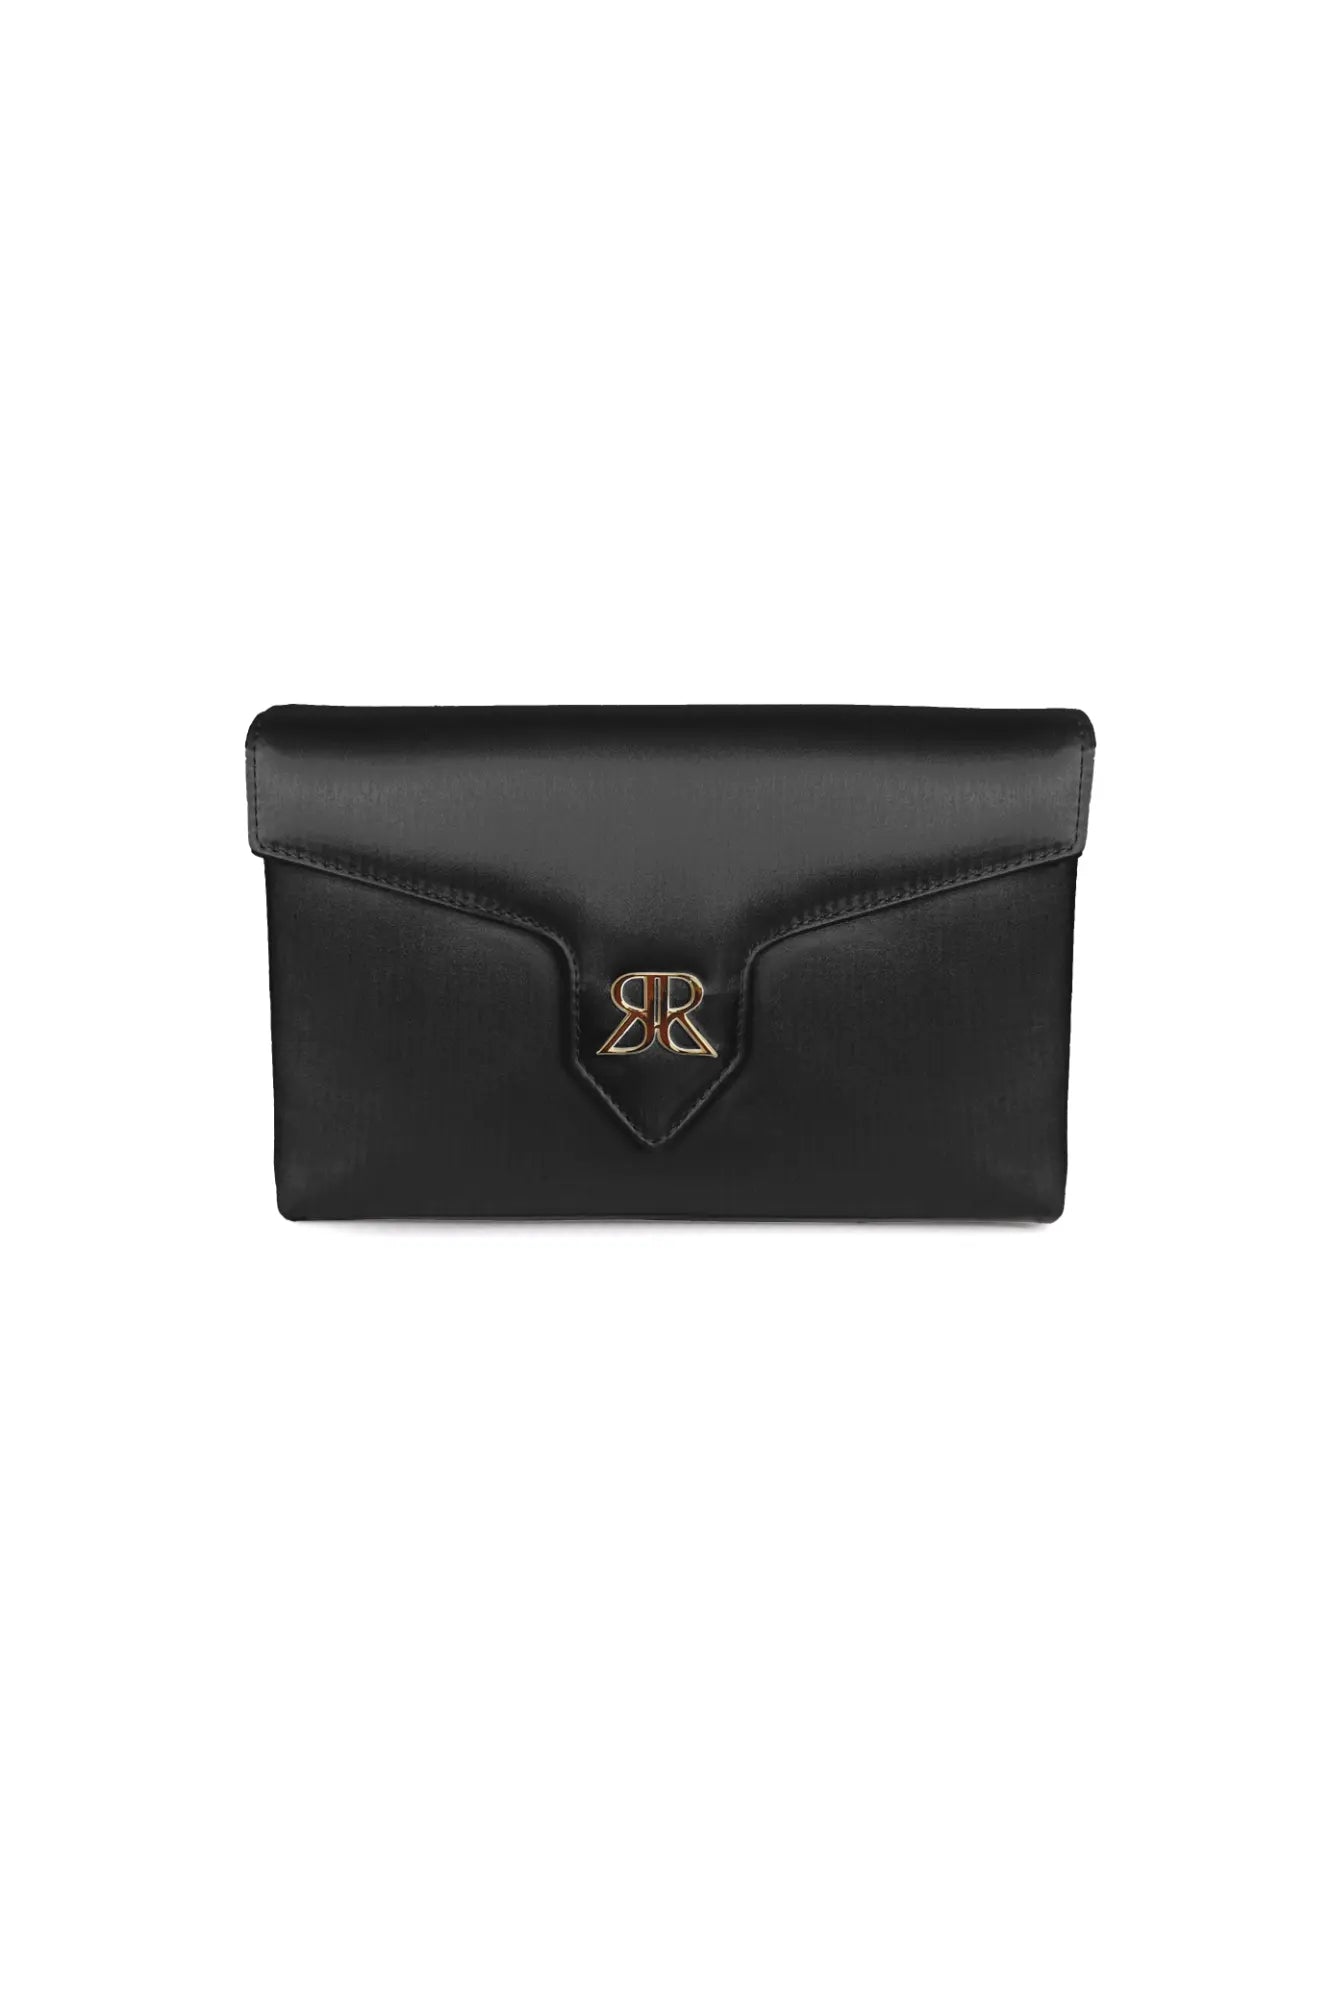 Love Note Envelope Clutch Black from The Bella Rosa Collection with a golden monogram.